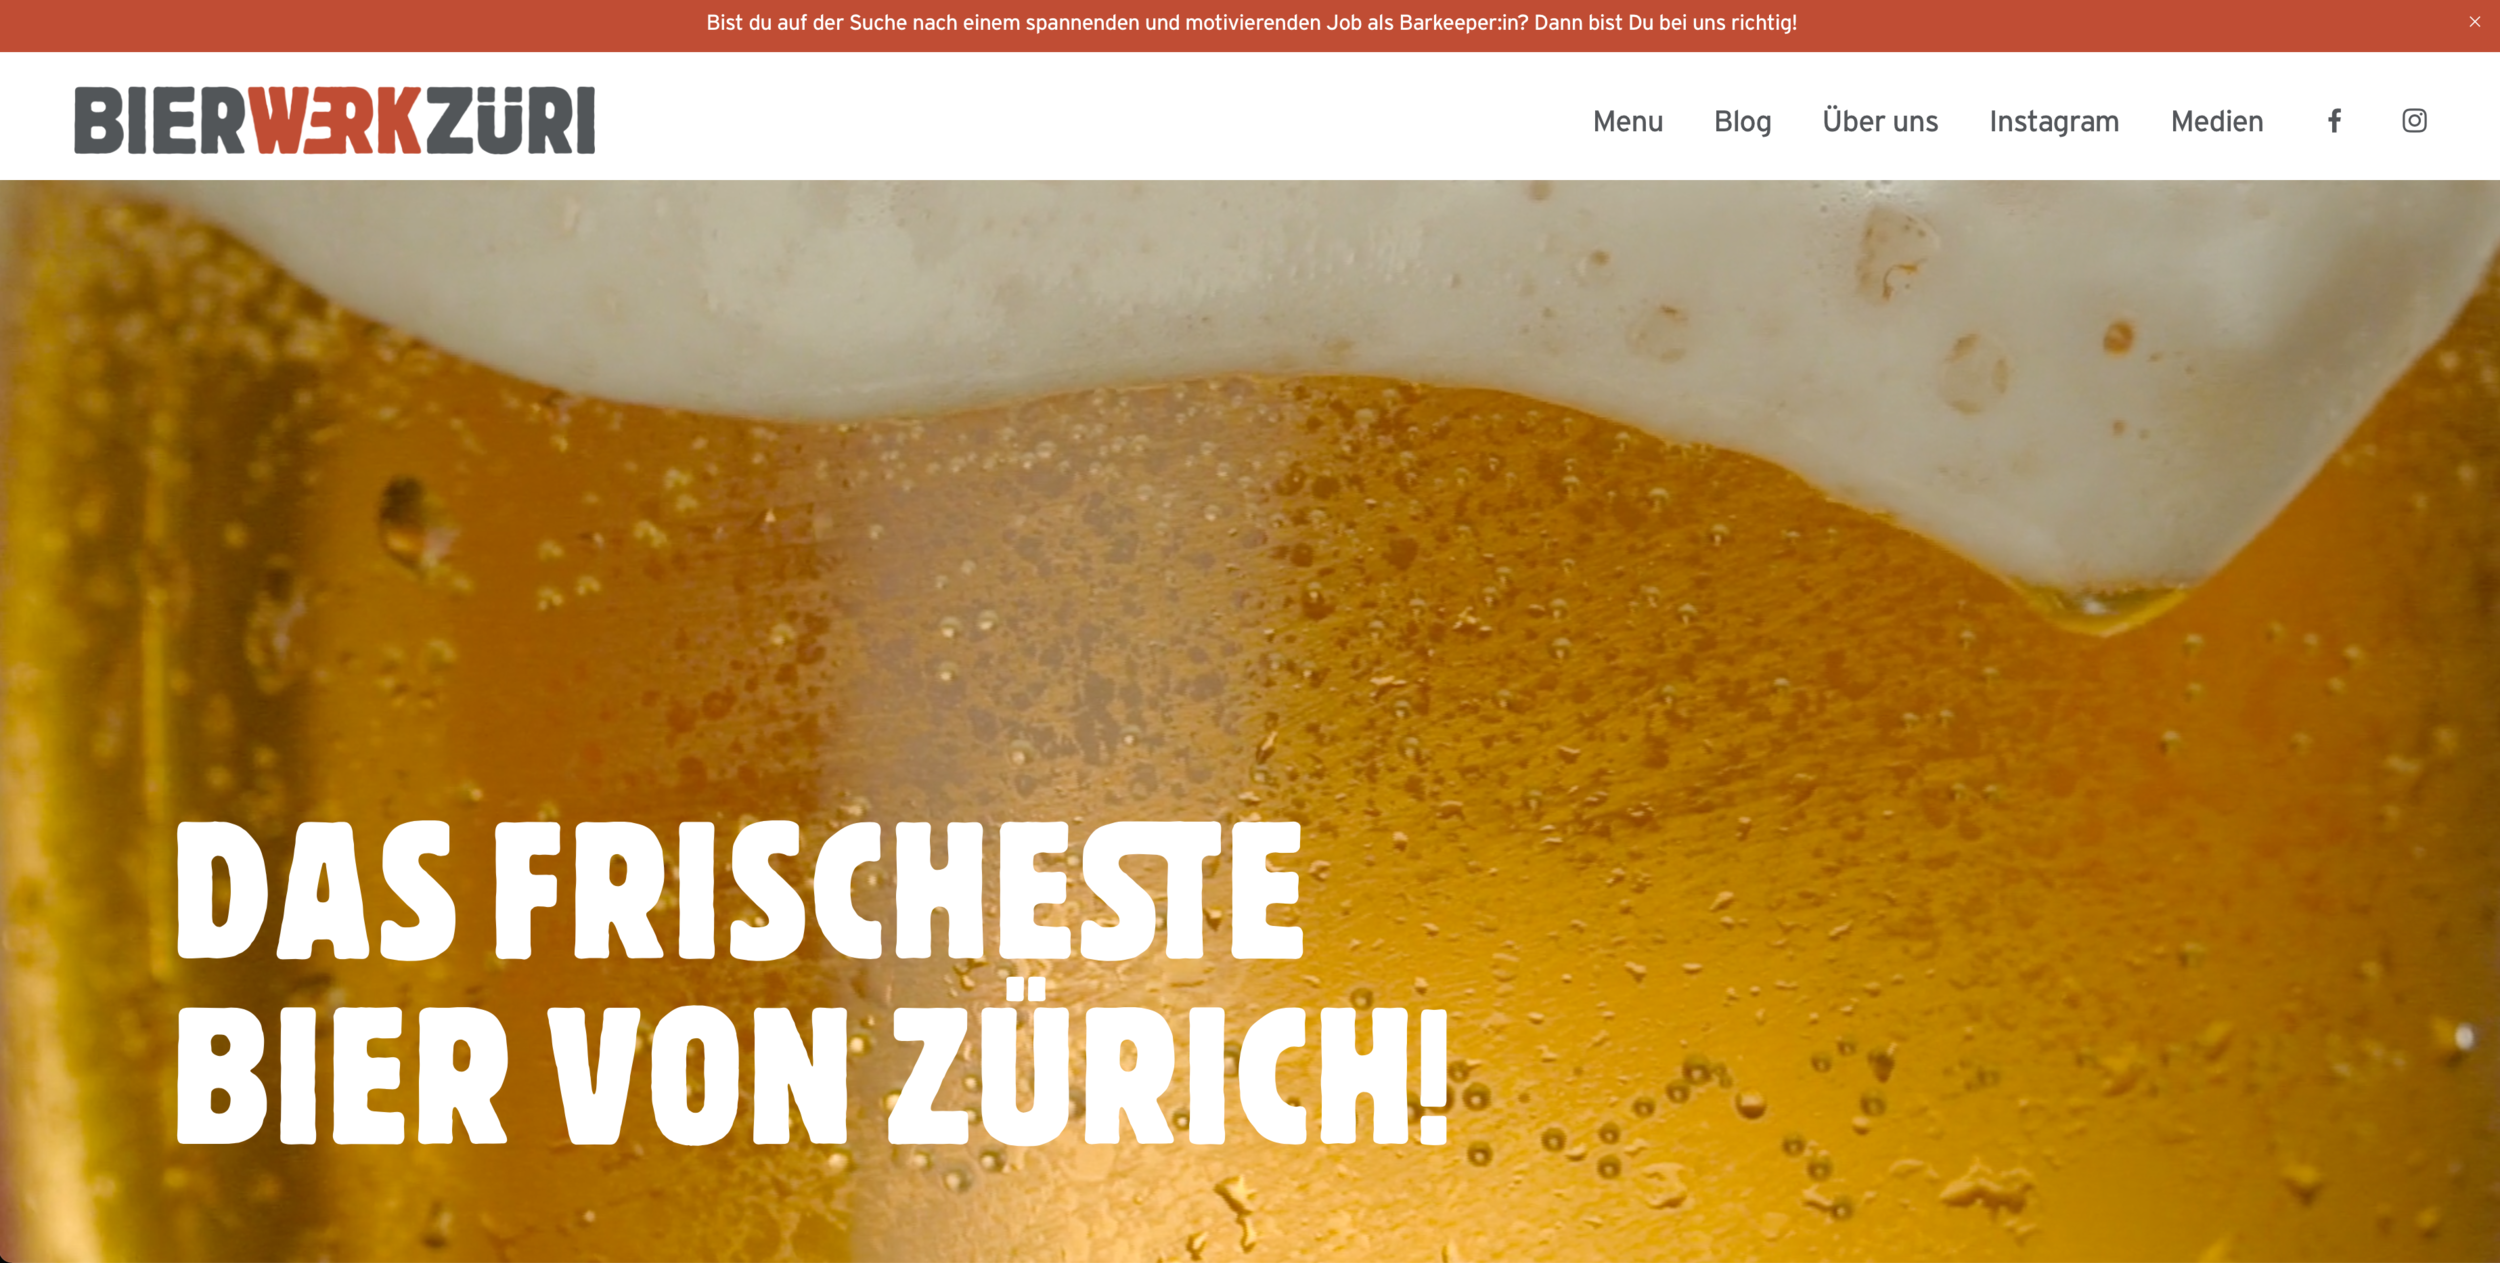 Website made by JPR Media GmbH_06.png